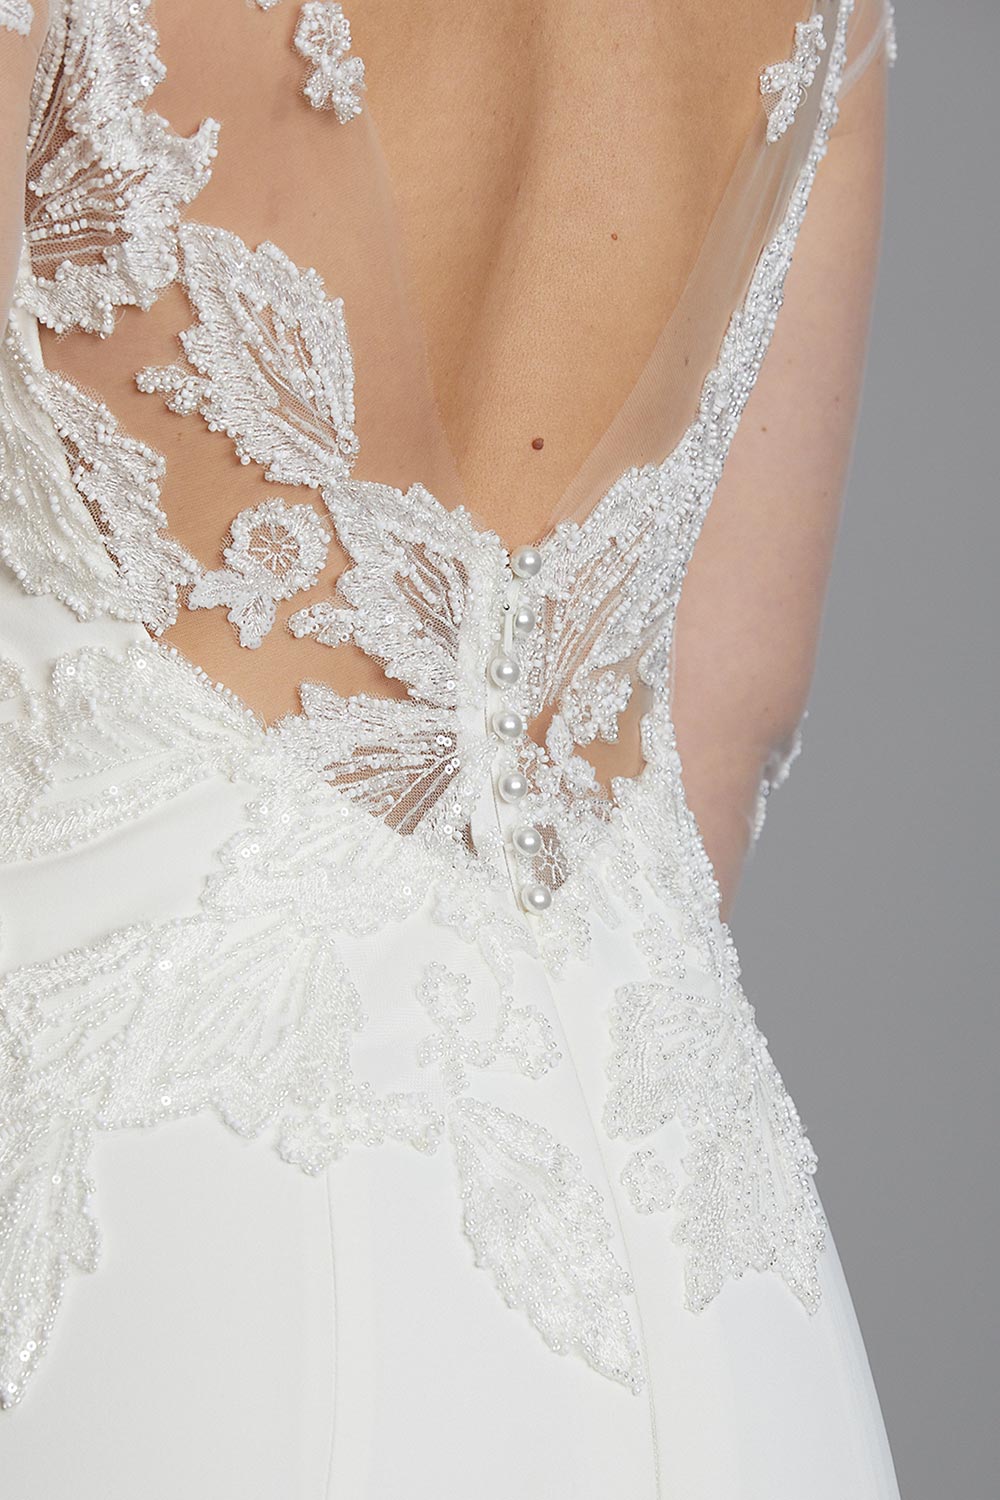 Ariel Wedding Dress from Vinka Design. Wedding dress with illusion scoop neckline & sheer low back with beaded lace. Long, fitted lace sleeves with pearl buttons & A-line skirt that falls into a train. Close up of low back lace detail of the dress, photographed by Emmaline Photography.